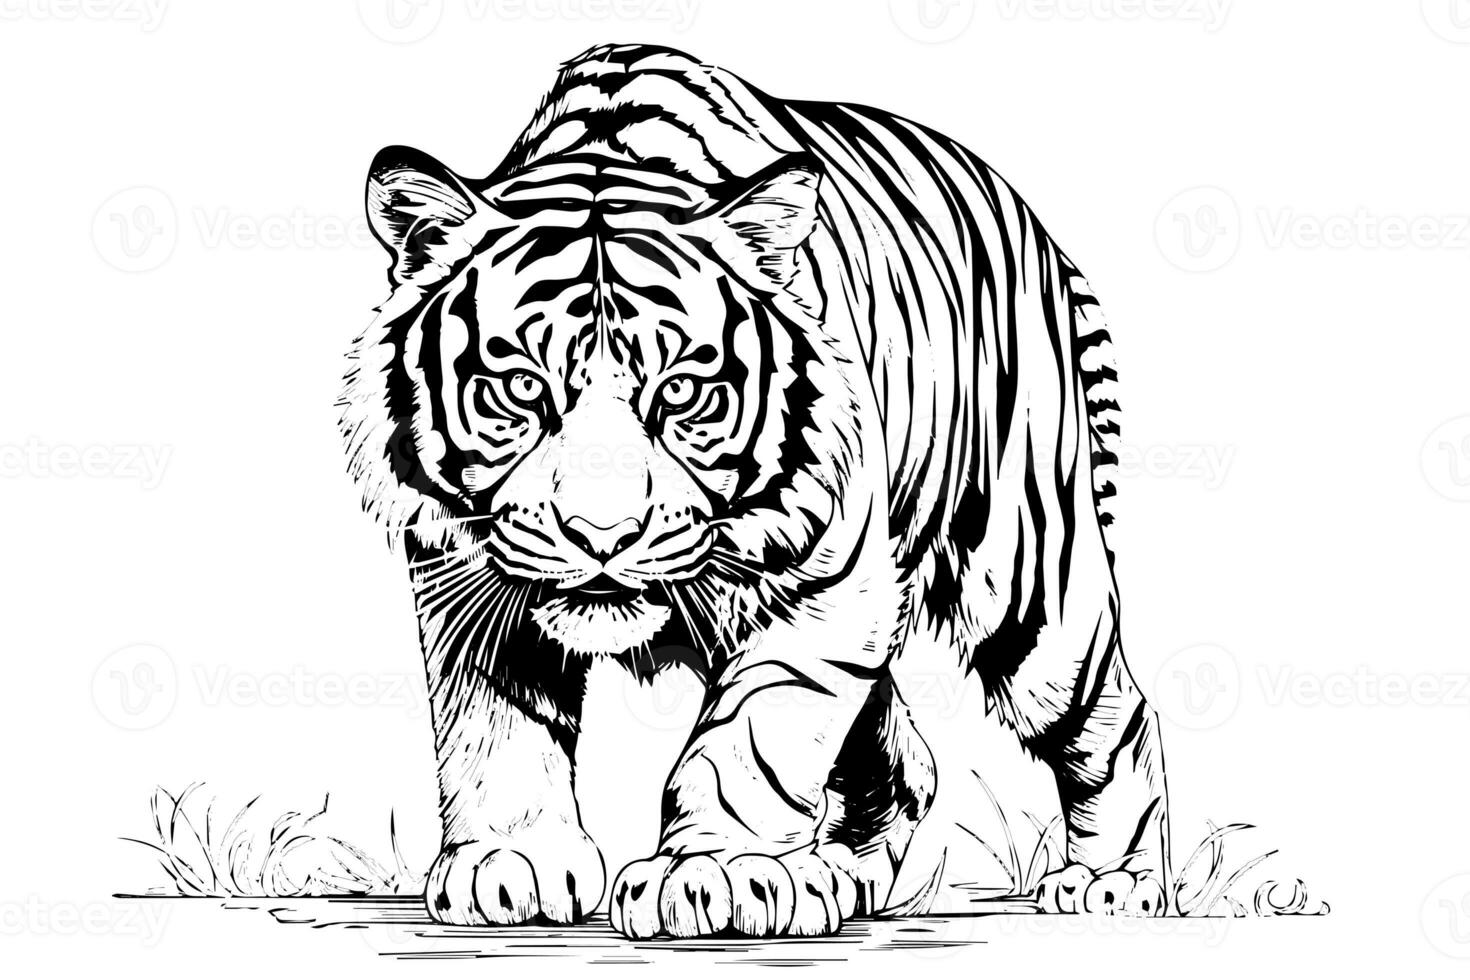 Hand drawn engraving style sketch of a tiger, vector ink illustration. photo